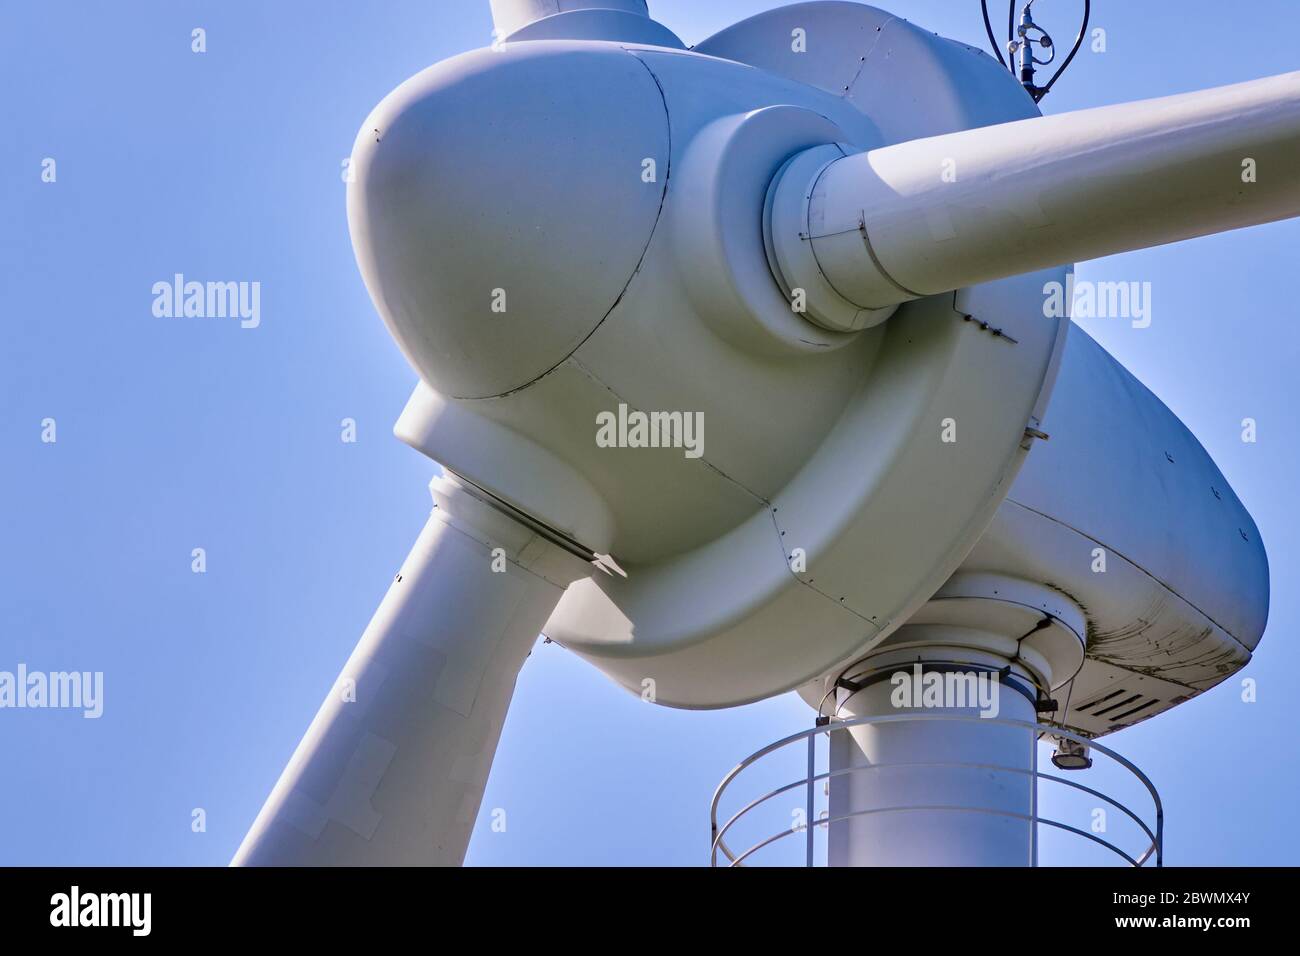 Close-up view of the hub of a wind turbine rotor Stock Photo